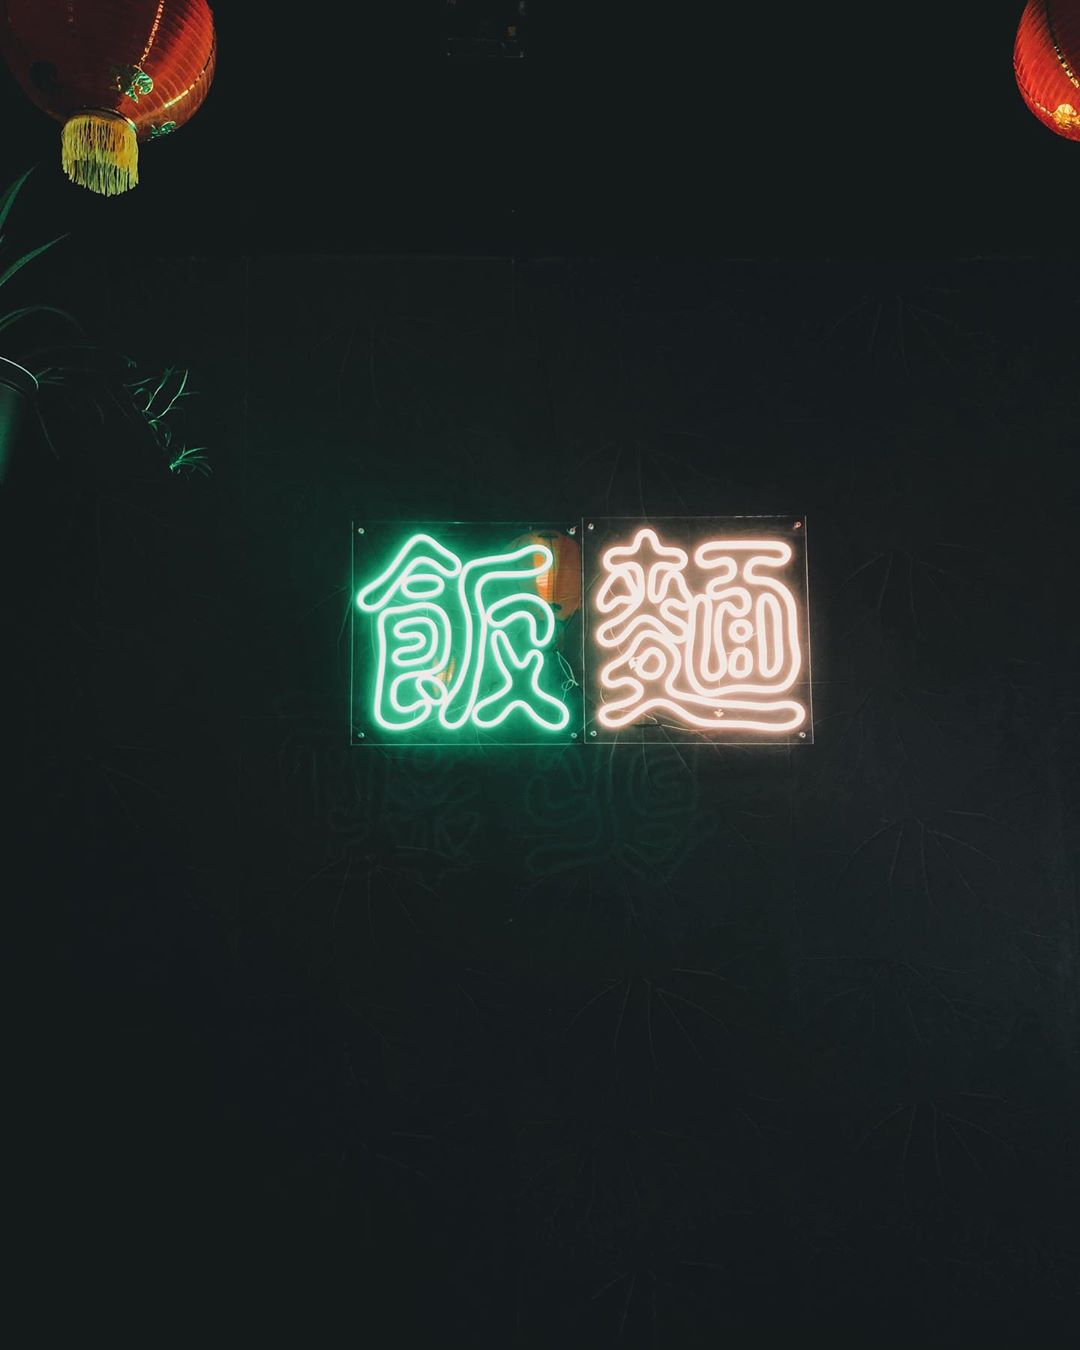 Rice & Noodles. Love for neon lights. ?#Interior #Xunoodlebar #Tilburg #Neon #lights #Chinese